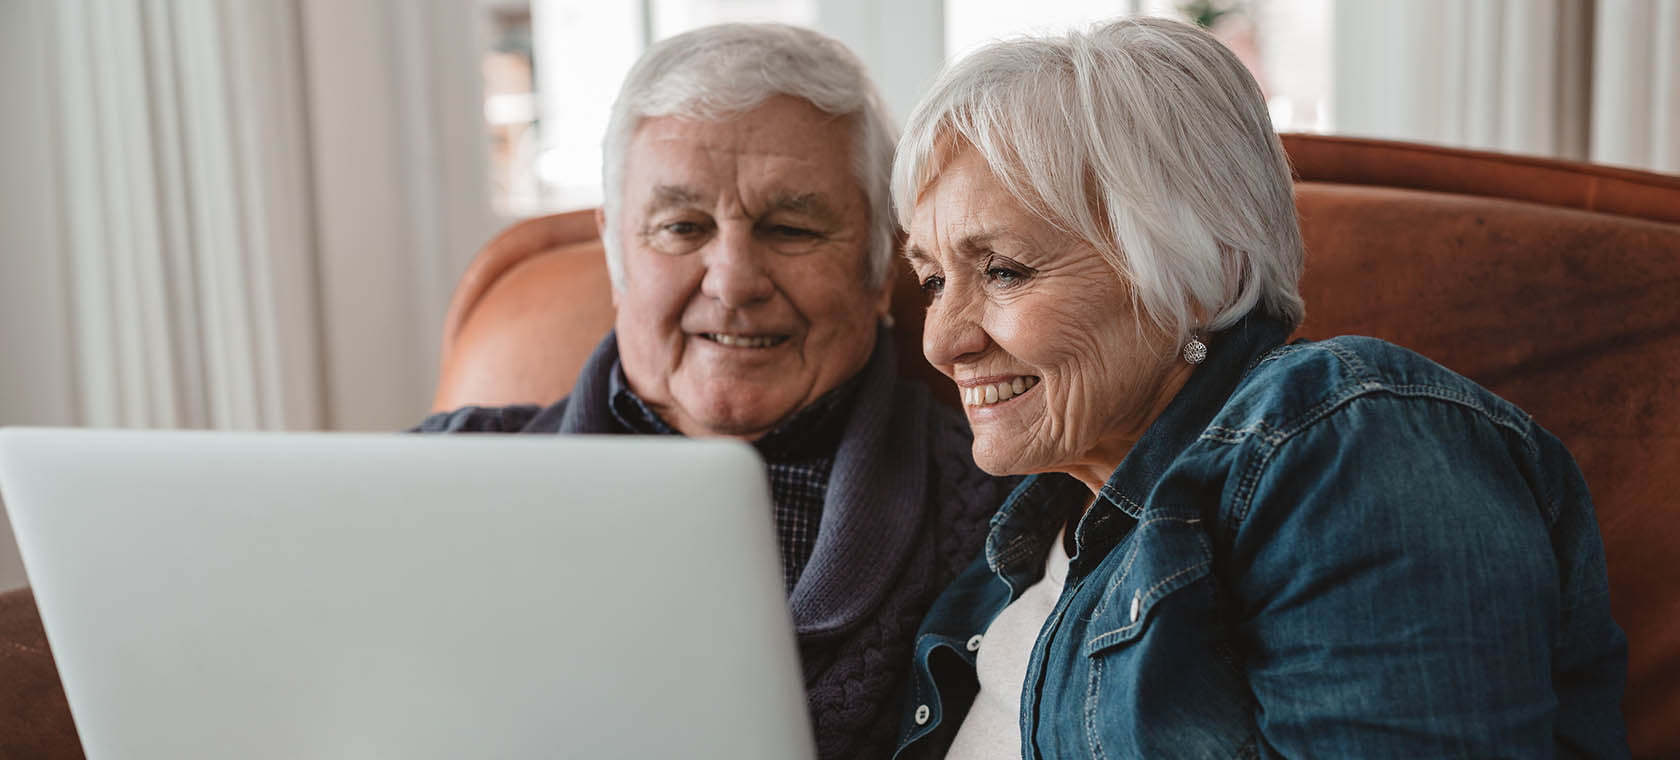 senior couple looking at senior living options for themselves on a lap top